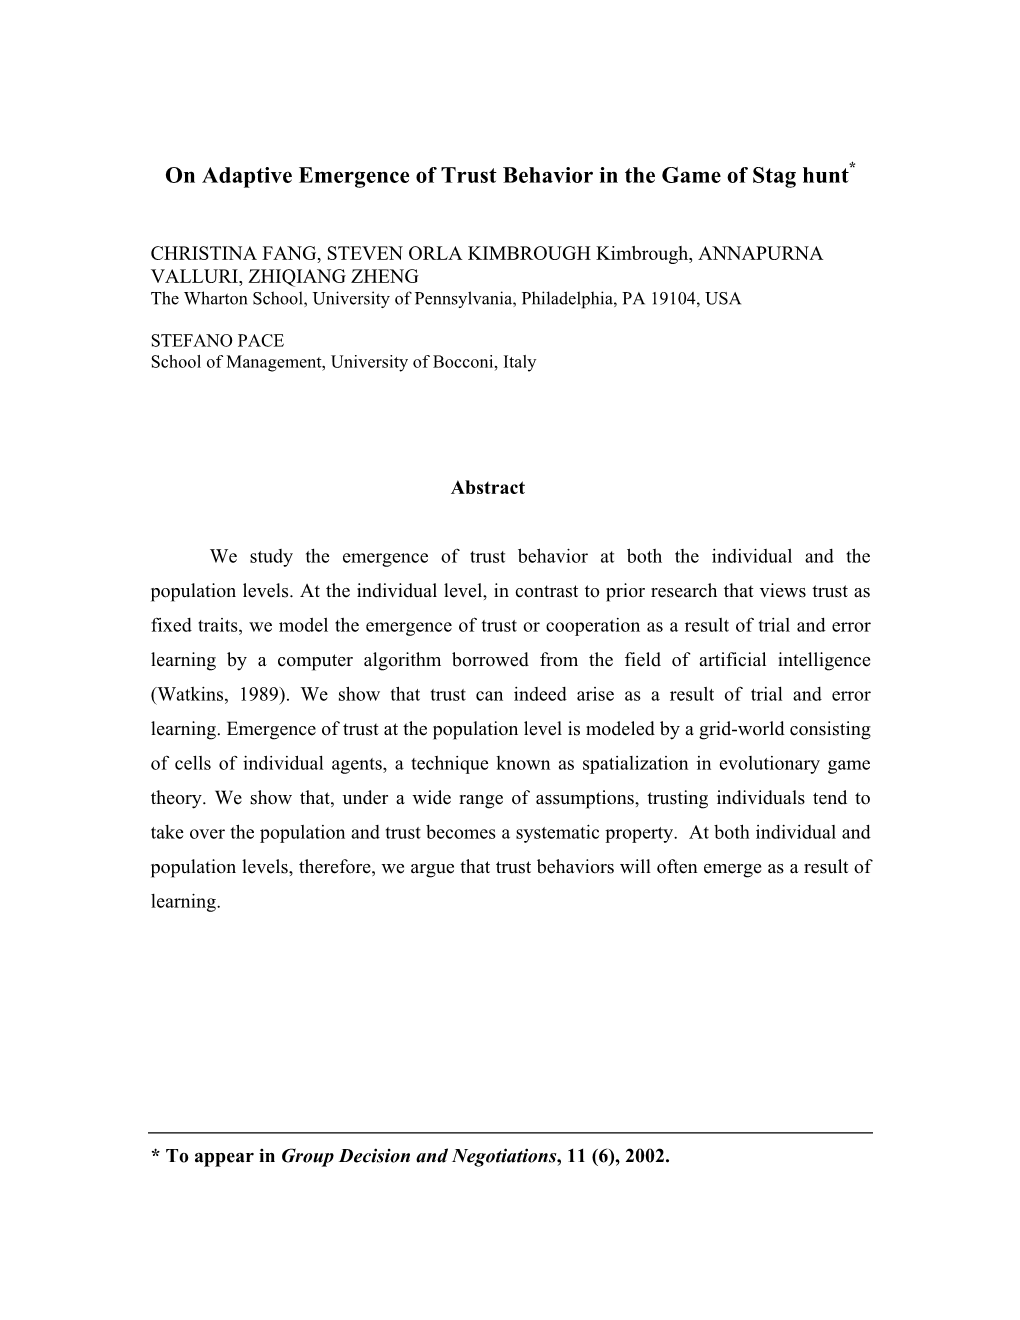 On Adaptive Emergence of Trust Behavior in the Game of Stag Hunt*